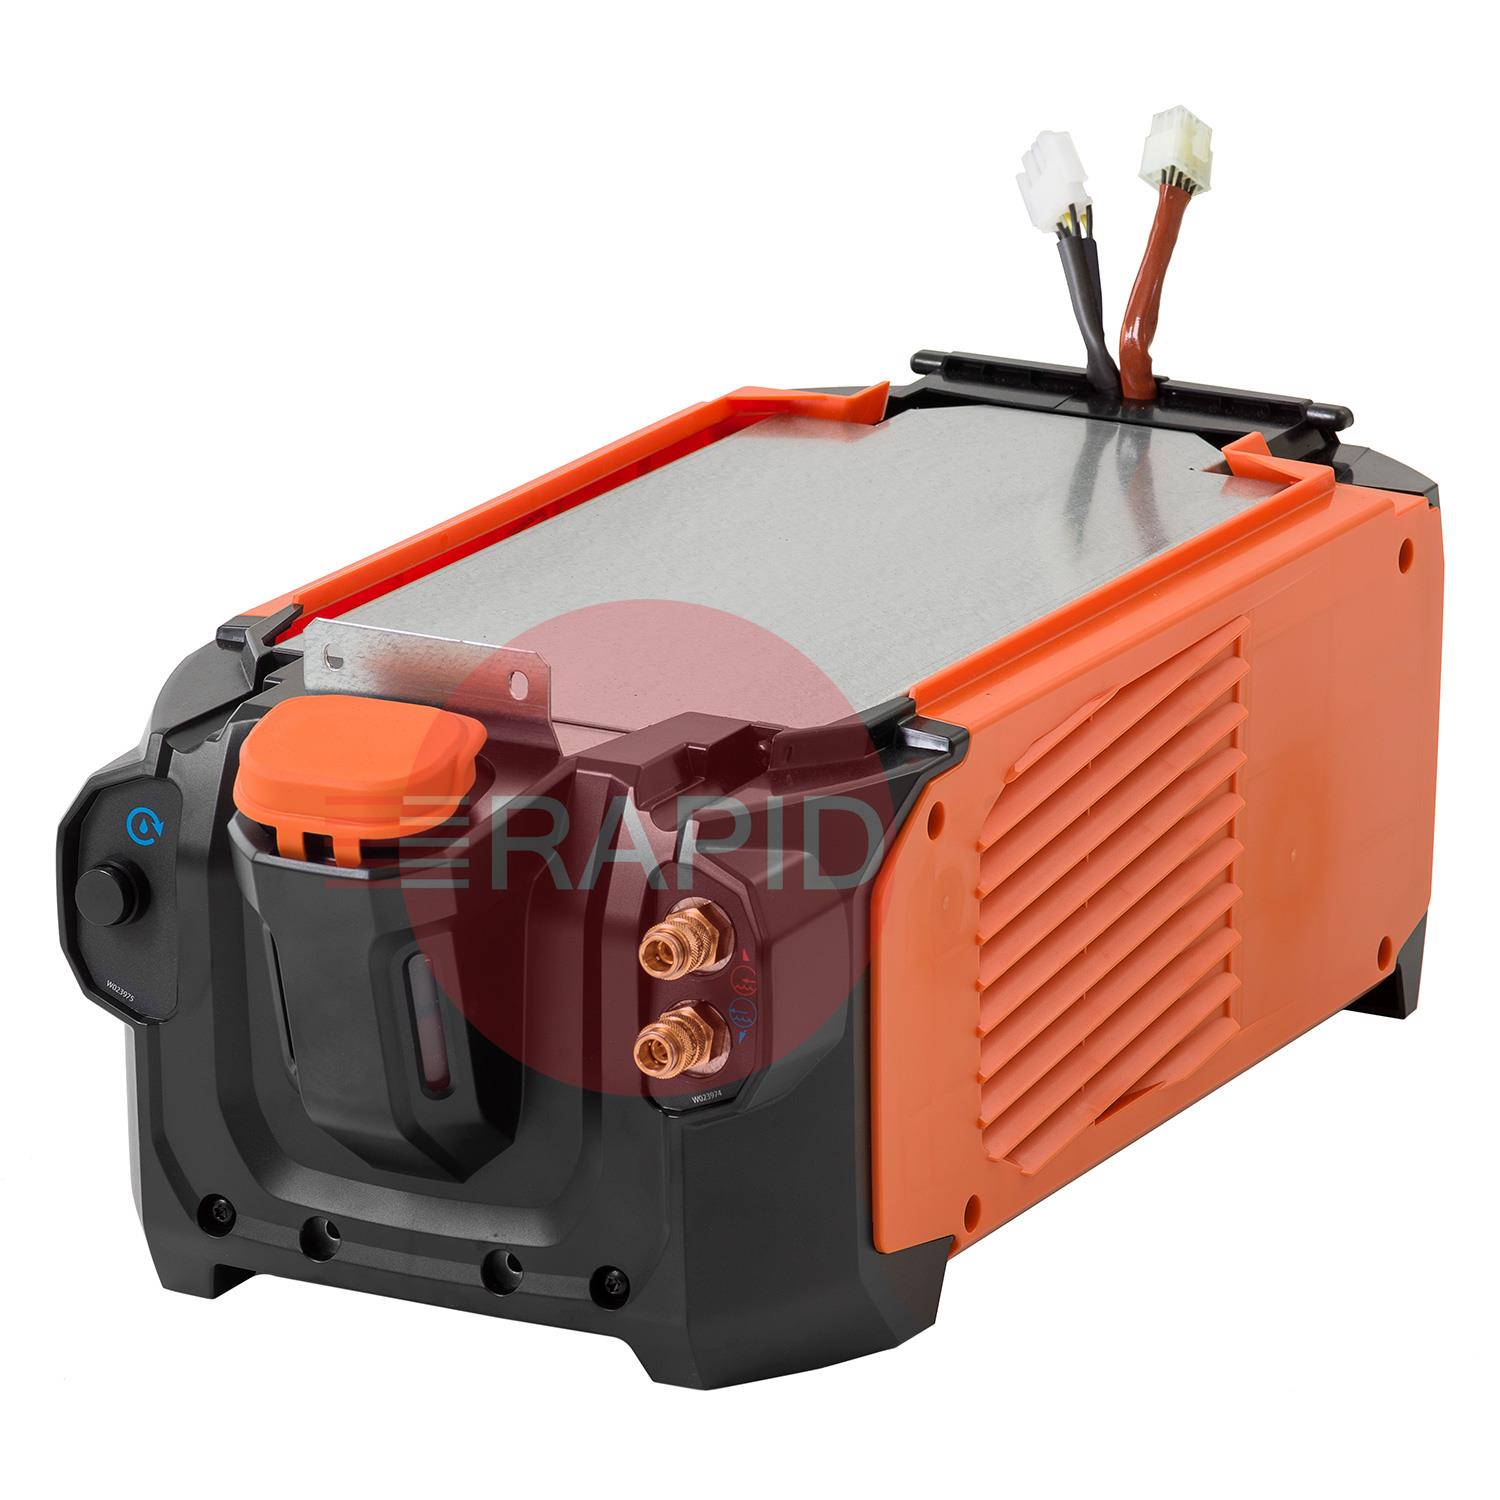 P23T355W4R  Kemppi Minarc T 223 AC/DC TIG Welder Water Cooled Package, with TX 355W 4m Torch & Foot Pedal - 110/240v, 1ph